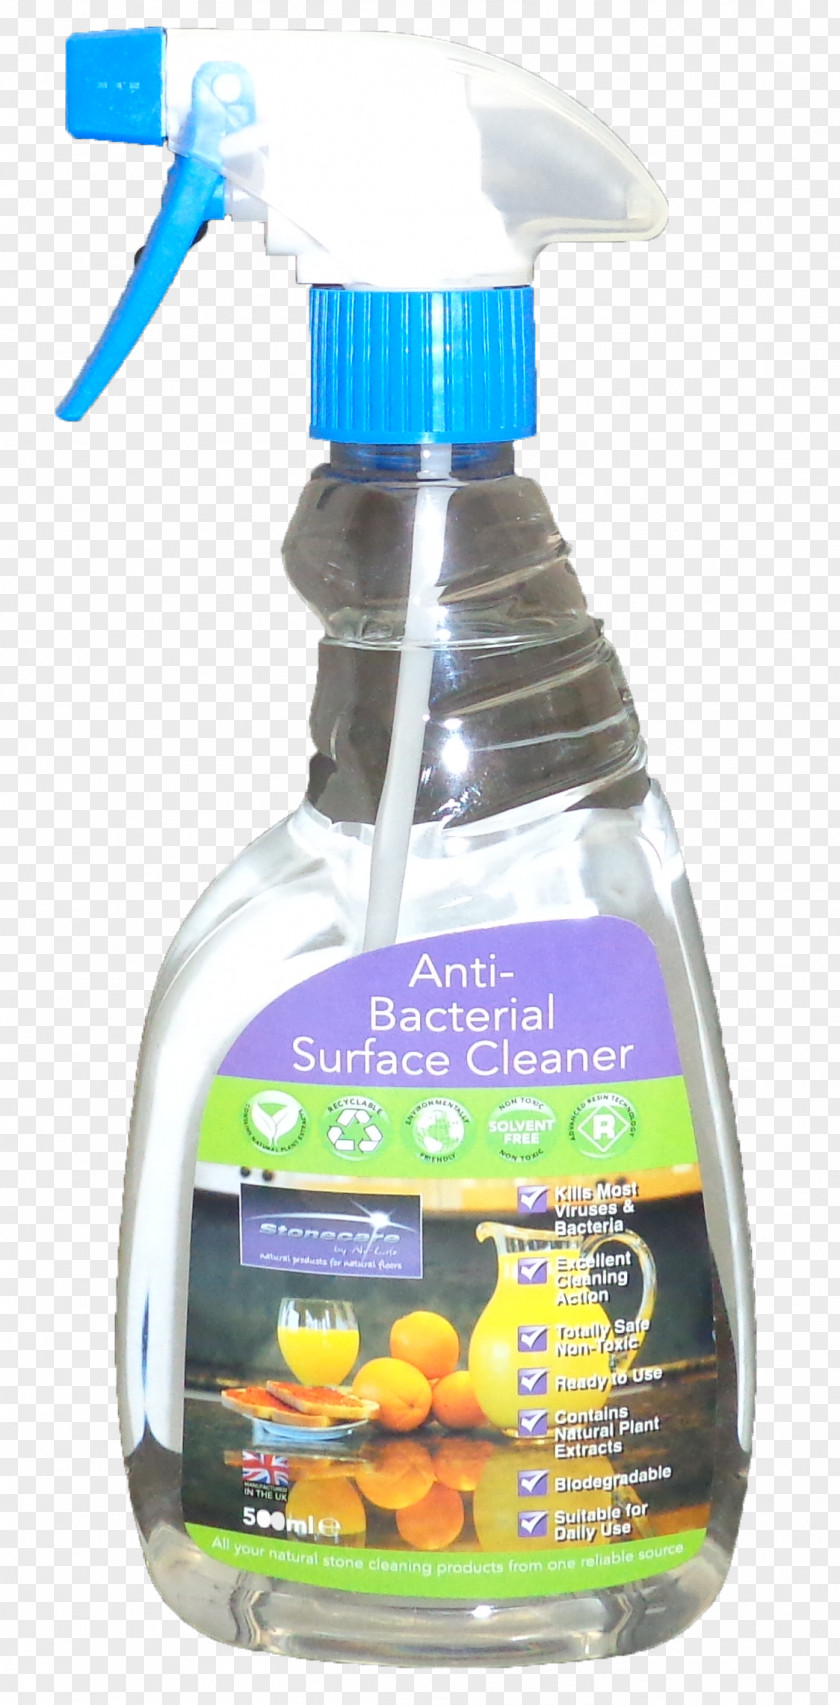 ANTI BACTERIAL Vapor Steam Cleaner Cleaning Agent PNG